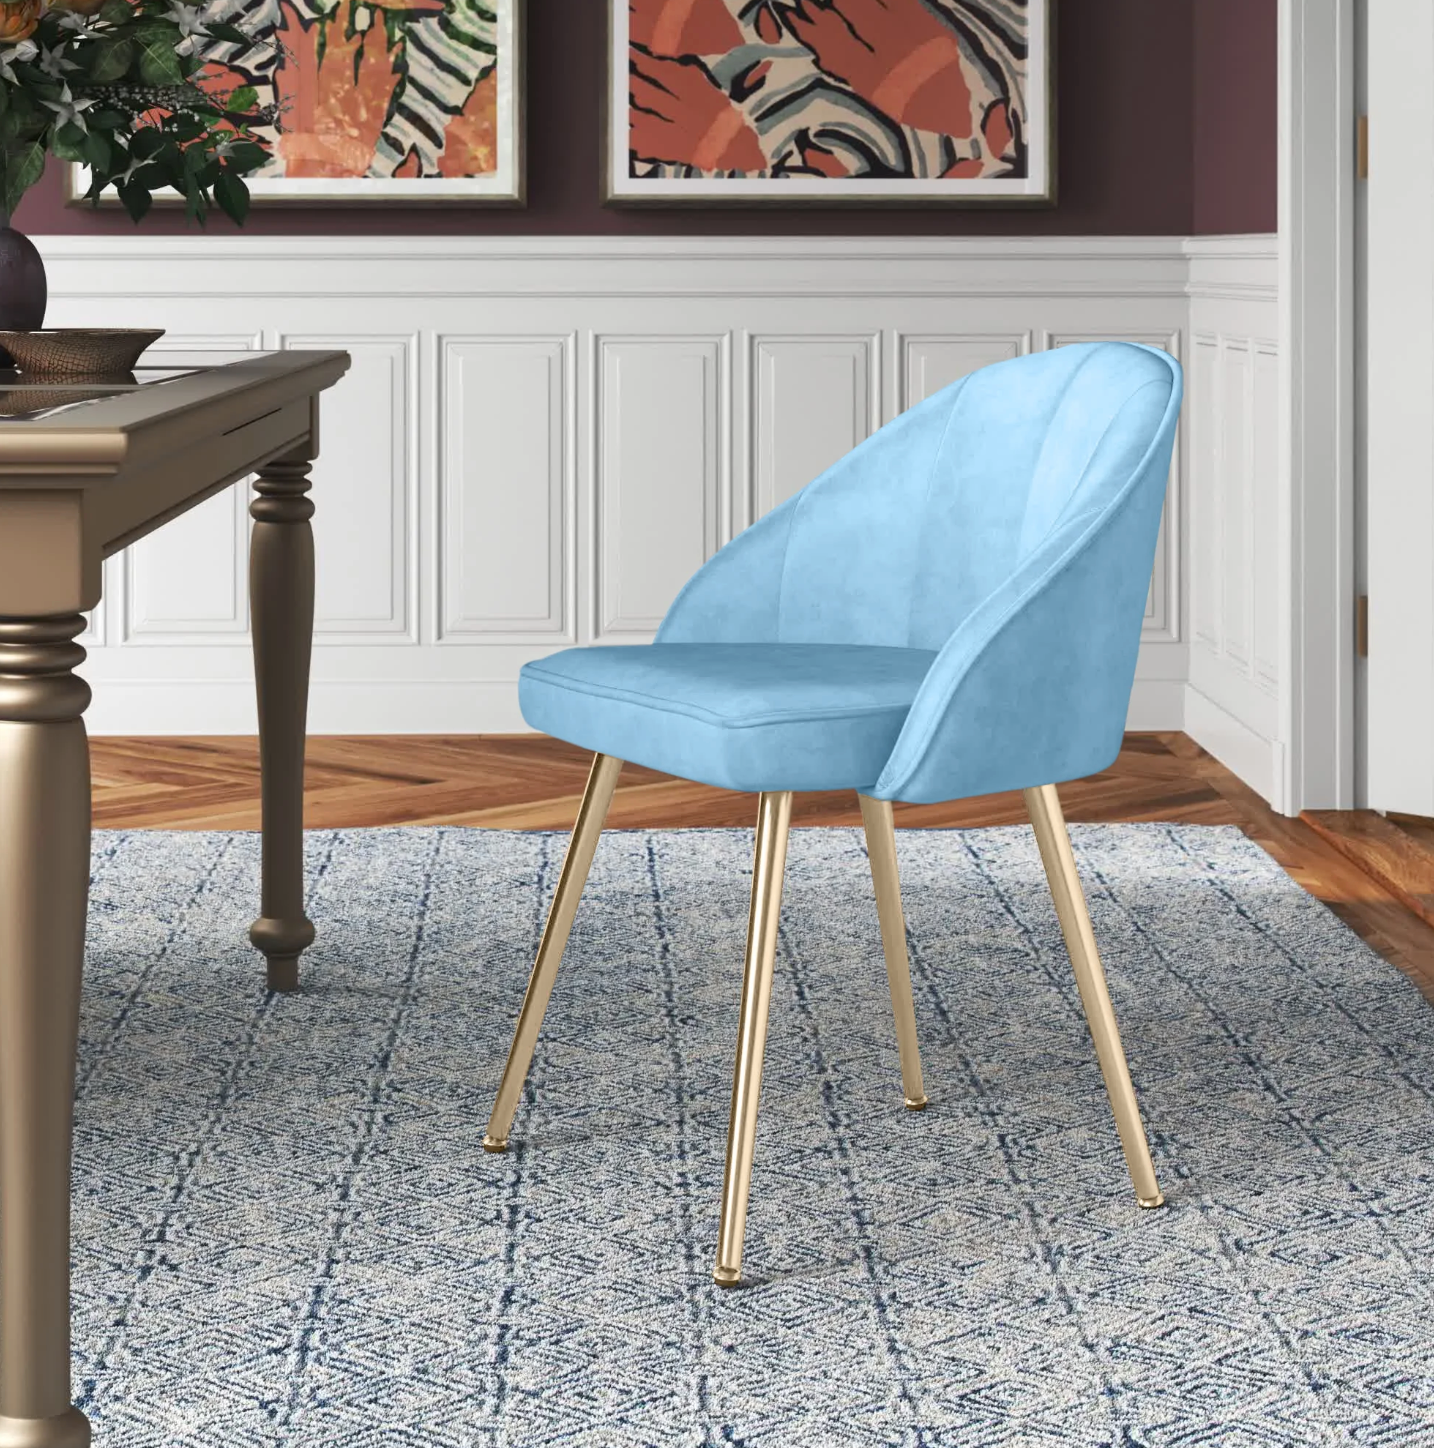 Light blue velvet chair with gold legs on a patterned white and blue rug in front of wooden table and white wall